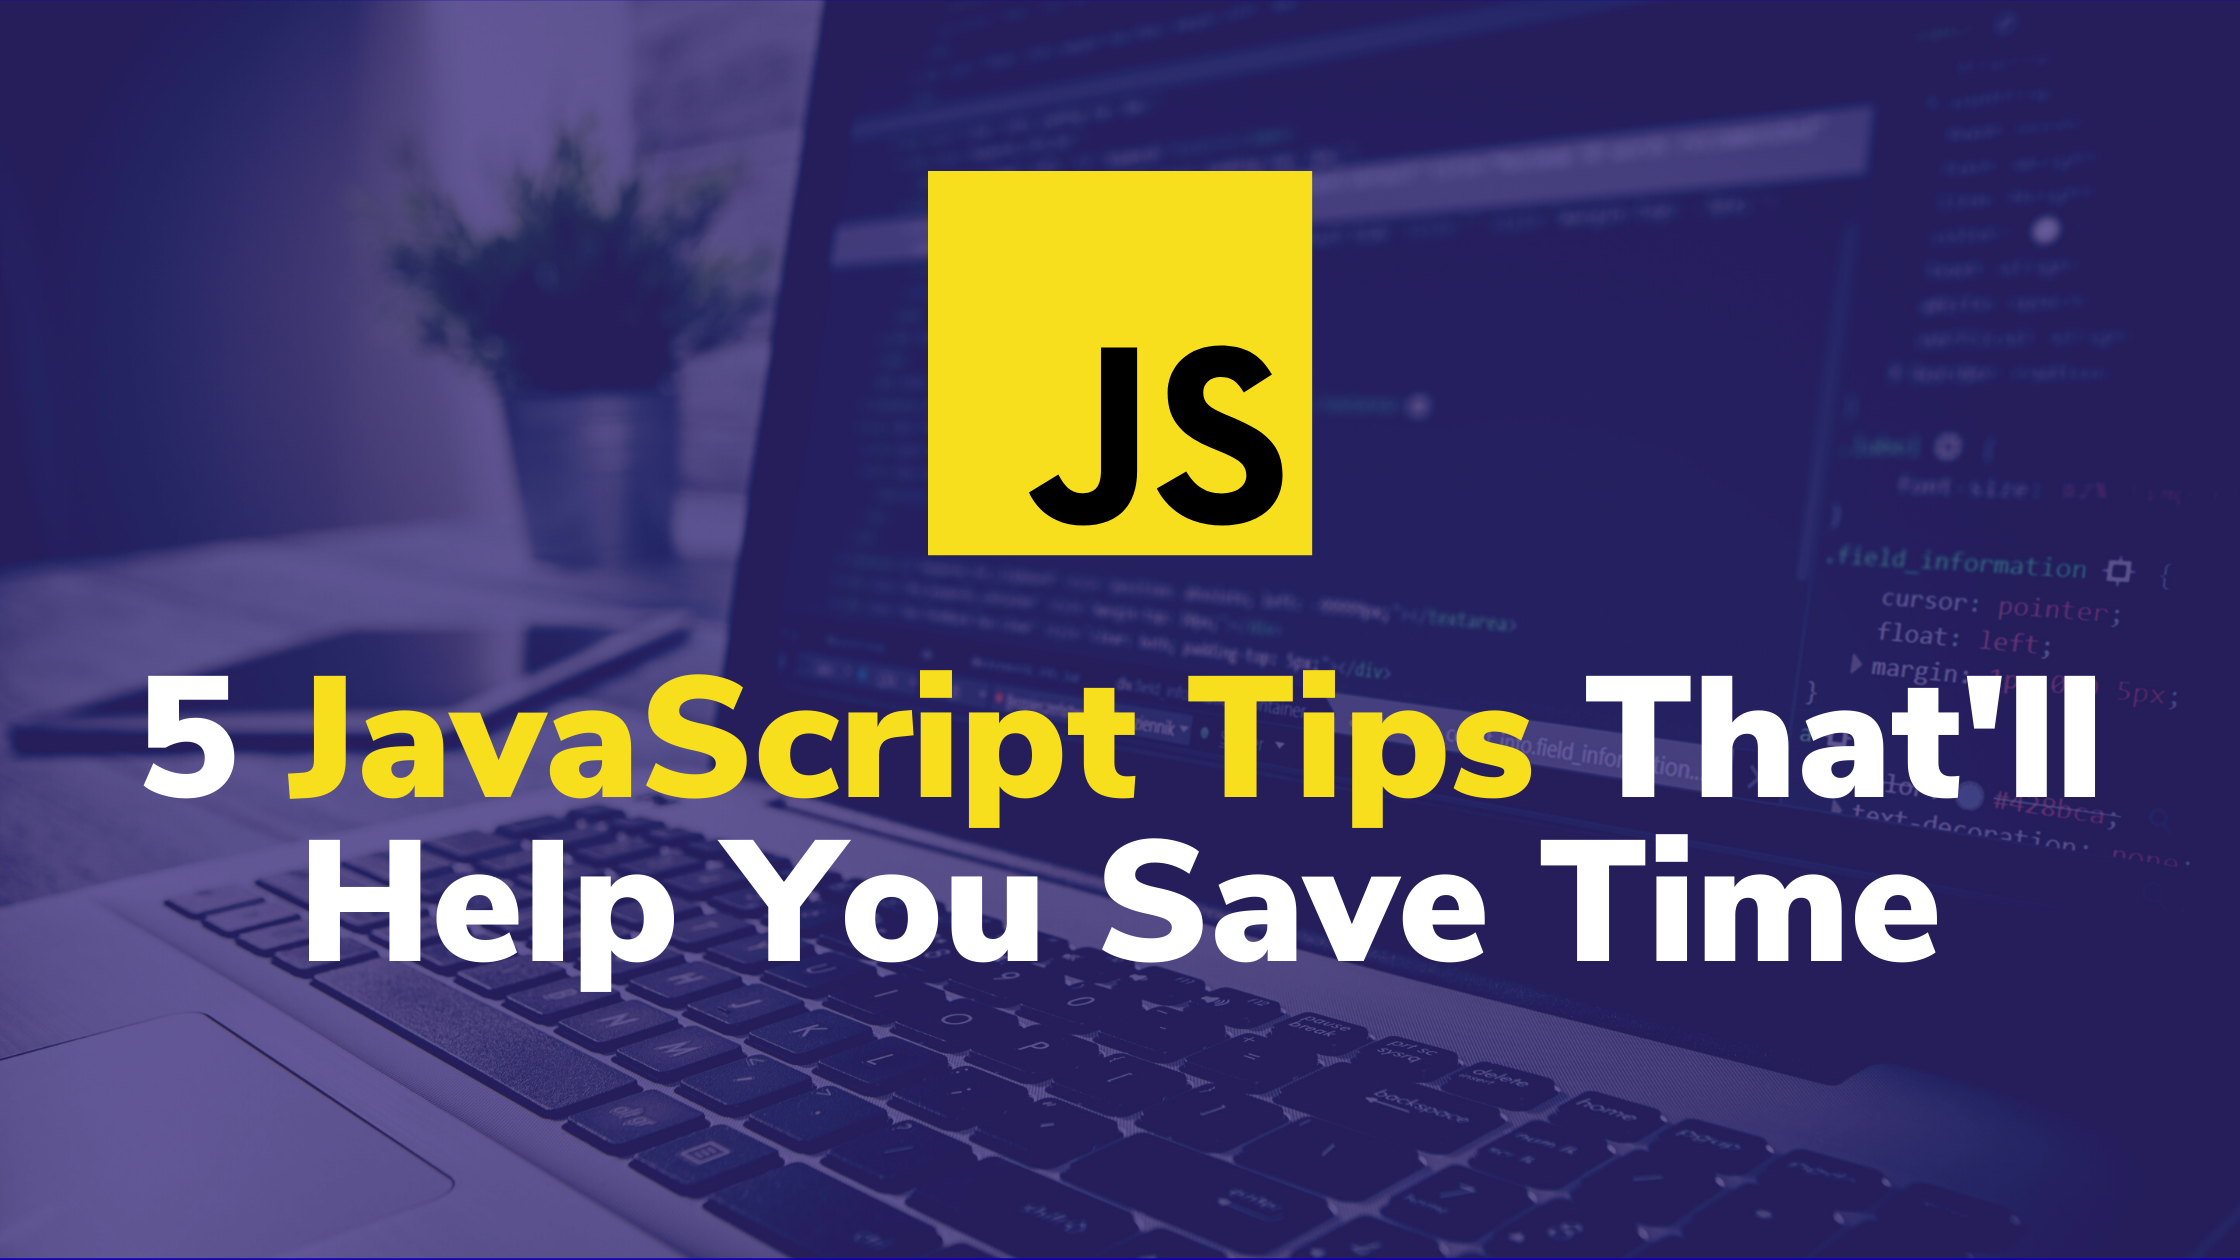 5 JavaScript Tips That'll Help You Save Time